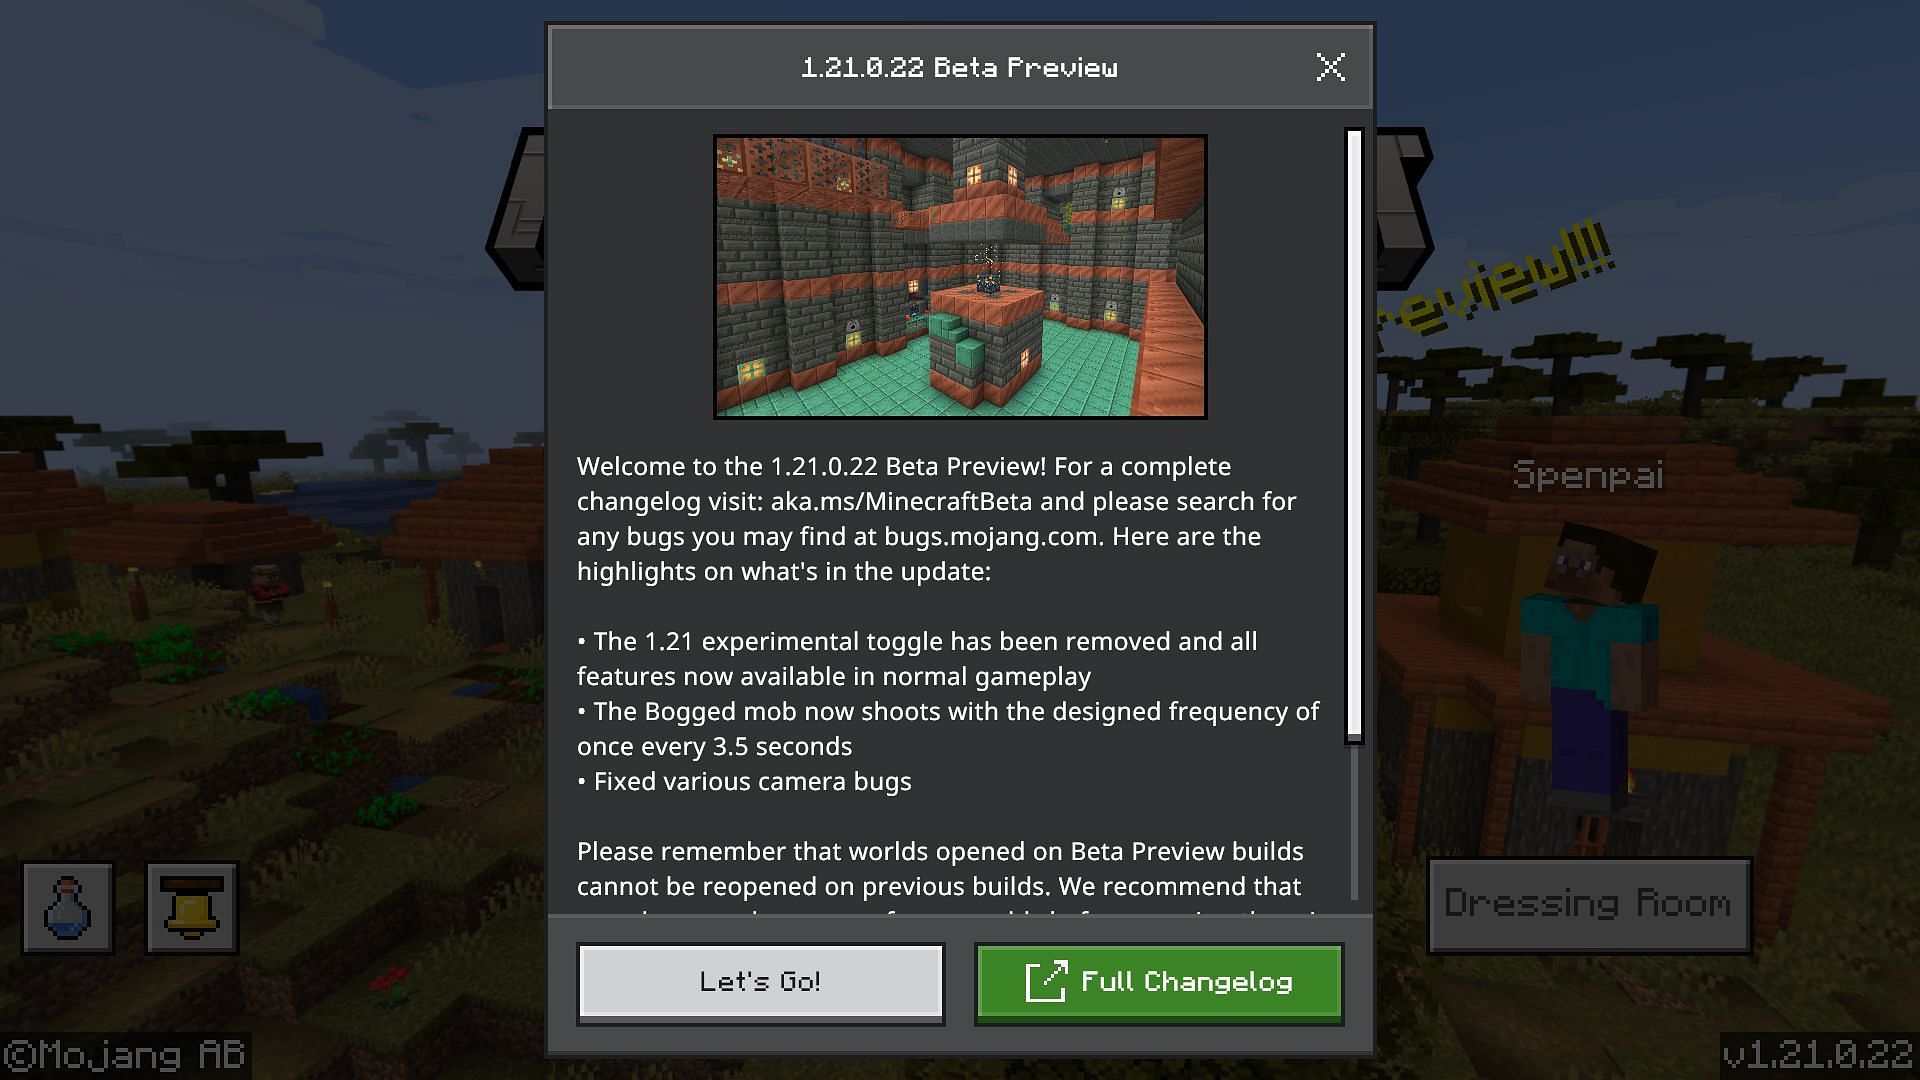 How to download Minecraft 1.21.0.22 beta and preview